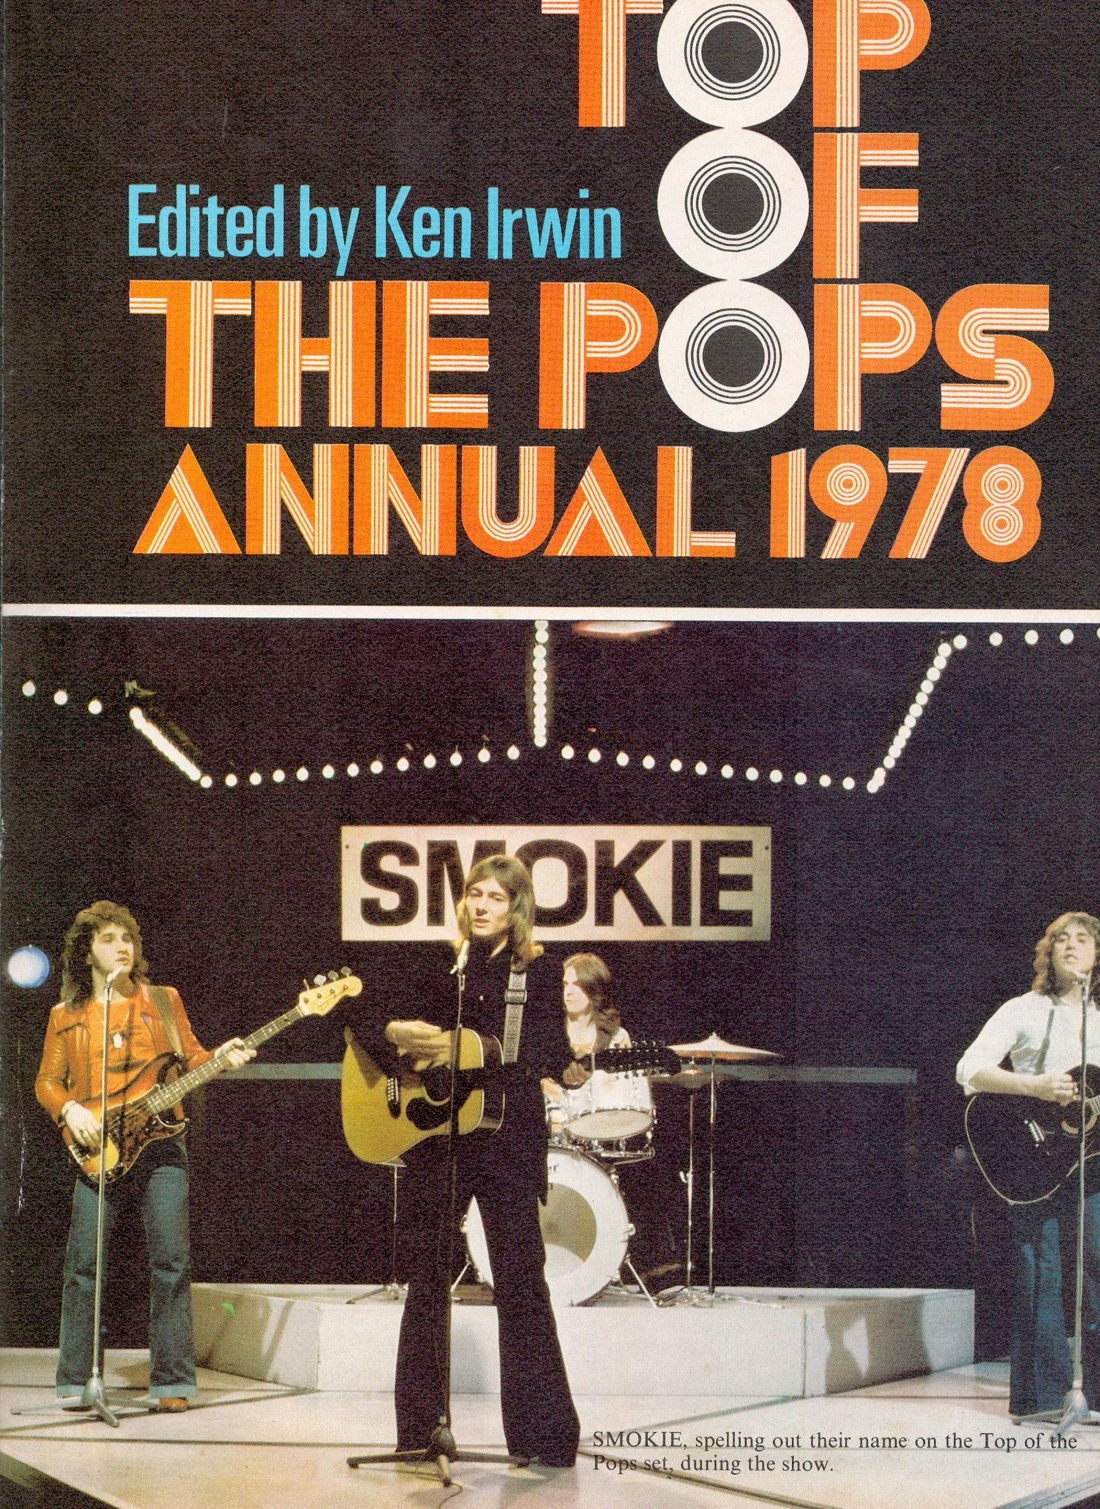 Top of The Pops Annual 1978 edited by Ken Irwin Hardback Book published by World Distributers ( - Image 3 of 4